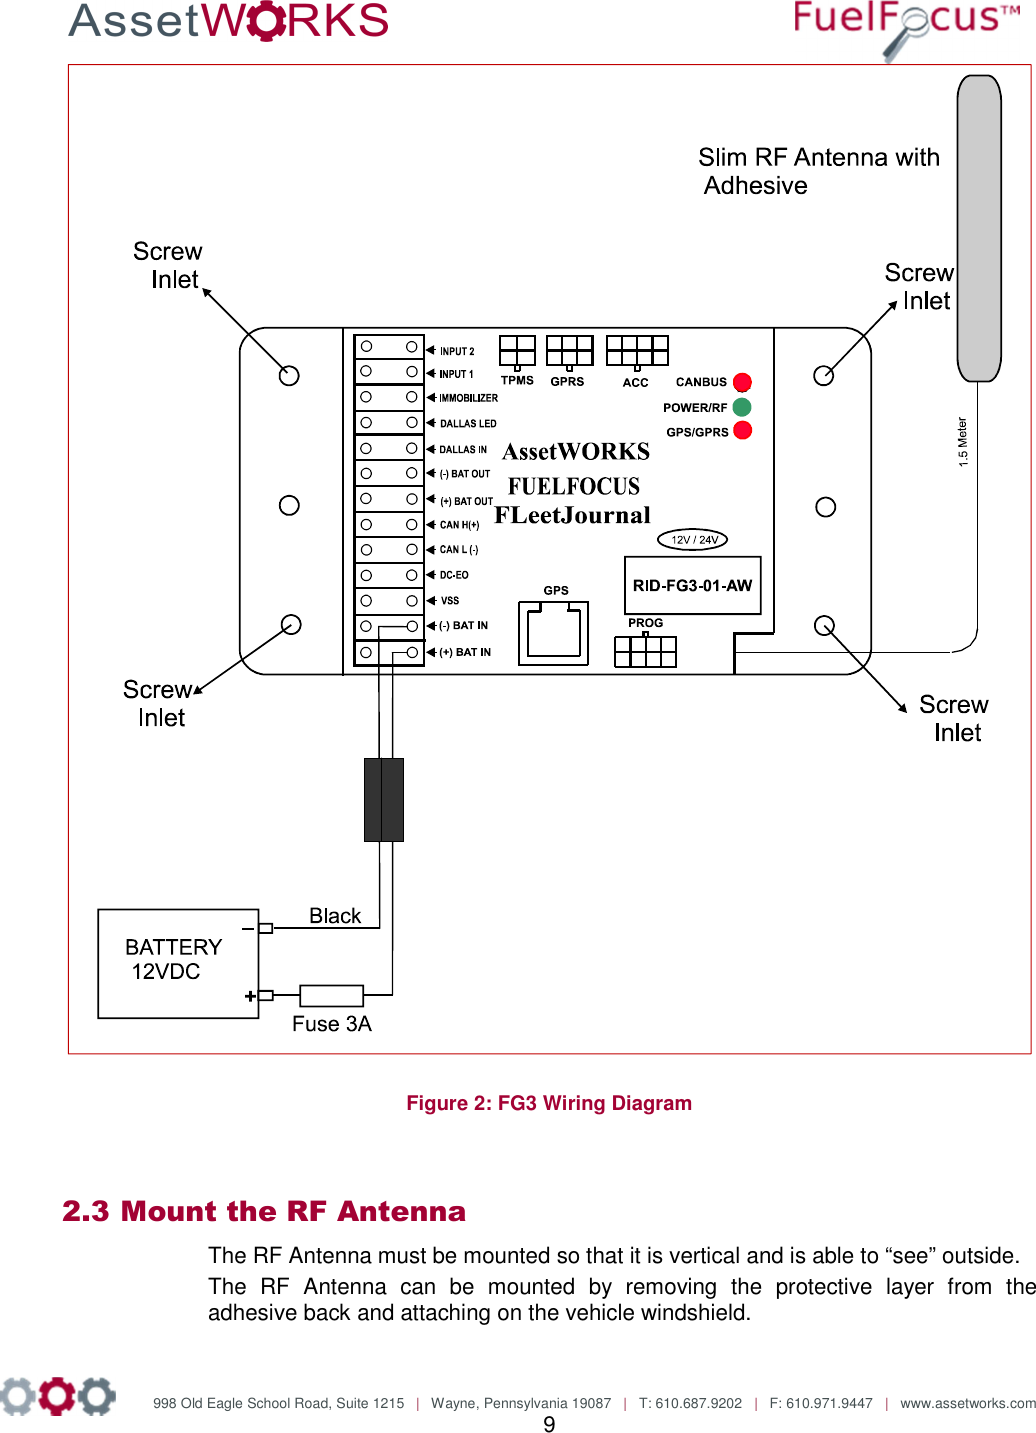               998 Old Eagle School Road, Suite 1215   |   Wayne, Pennsylvania 19087   |   T: 610.687.9202   |   F: 610.971.9447   |   www.assetworks.com 9    Figure 2: FG3 Wiring Diagram  2.3 Mount the RF Antenna The RF Antenna must be mounted so that it is vertical and is able to “see” outside.  The  RF  Antenna  can  be  mounted  by  removing  the  protective  layer  from  the adhesive back and attaching on the vehicle windshield. 